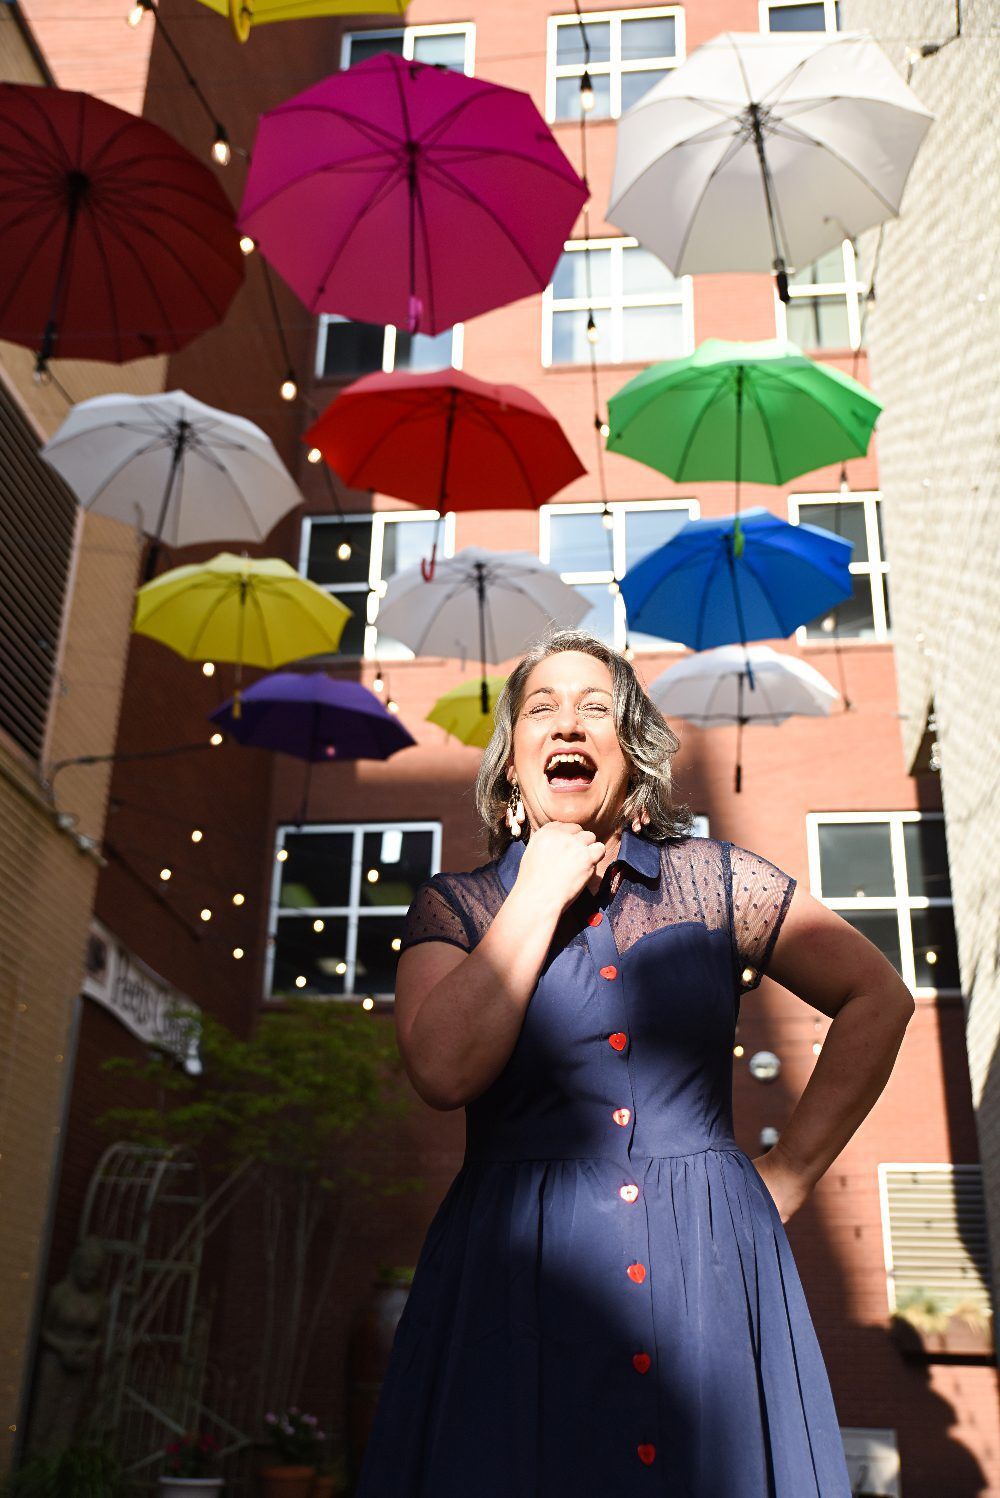 "Chattanooga travel blogger Kathy Brown stands under a colorful umbrella canopy in a hip alley, wearing a blue retro dress with pink buttons and smiling with excitement in her eyes."